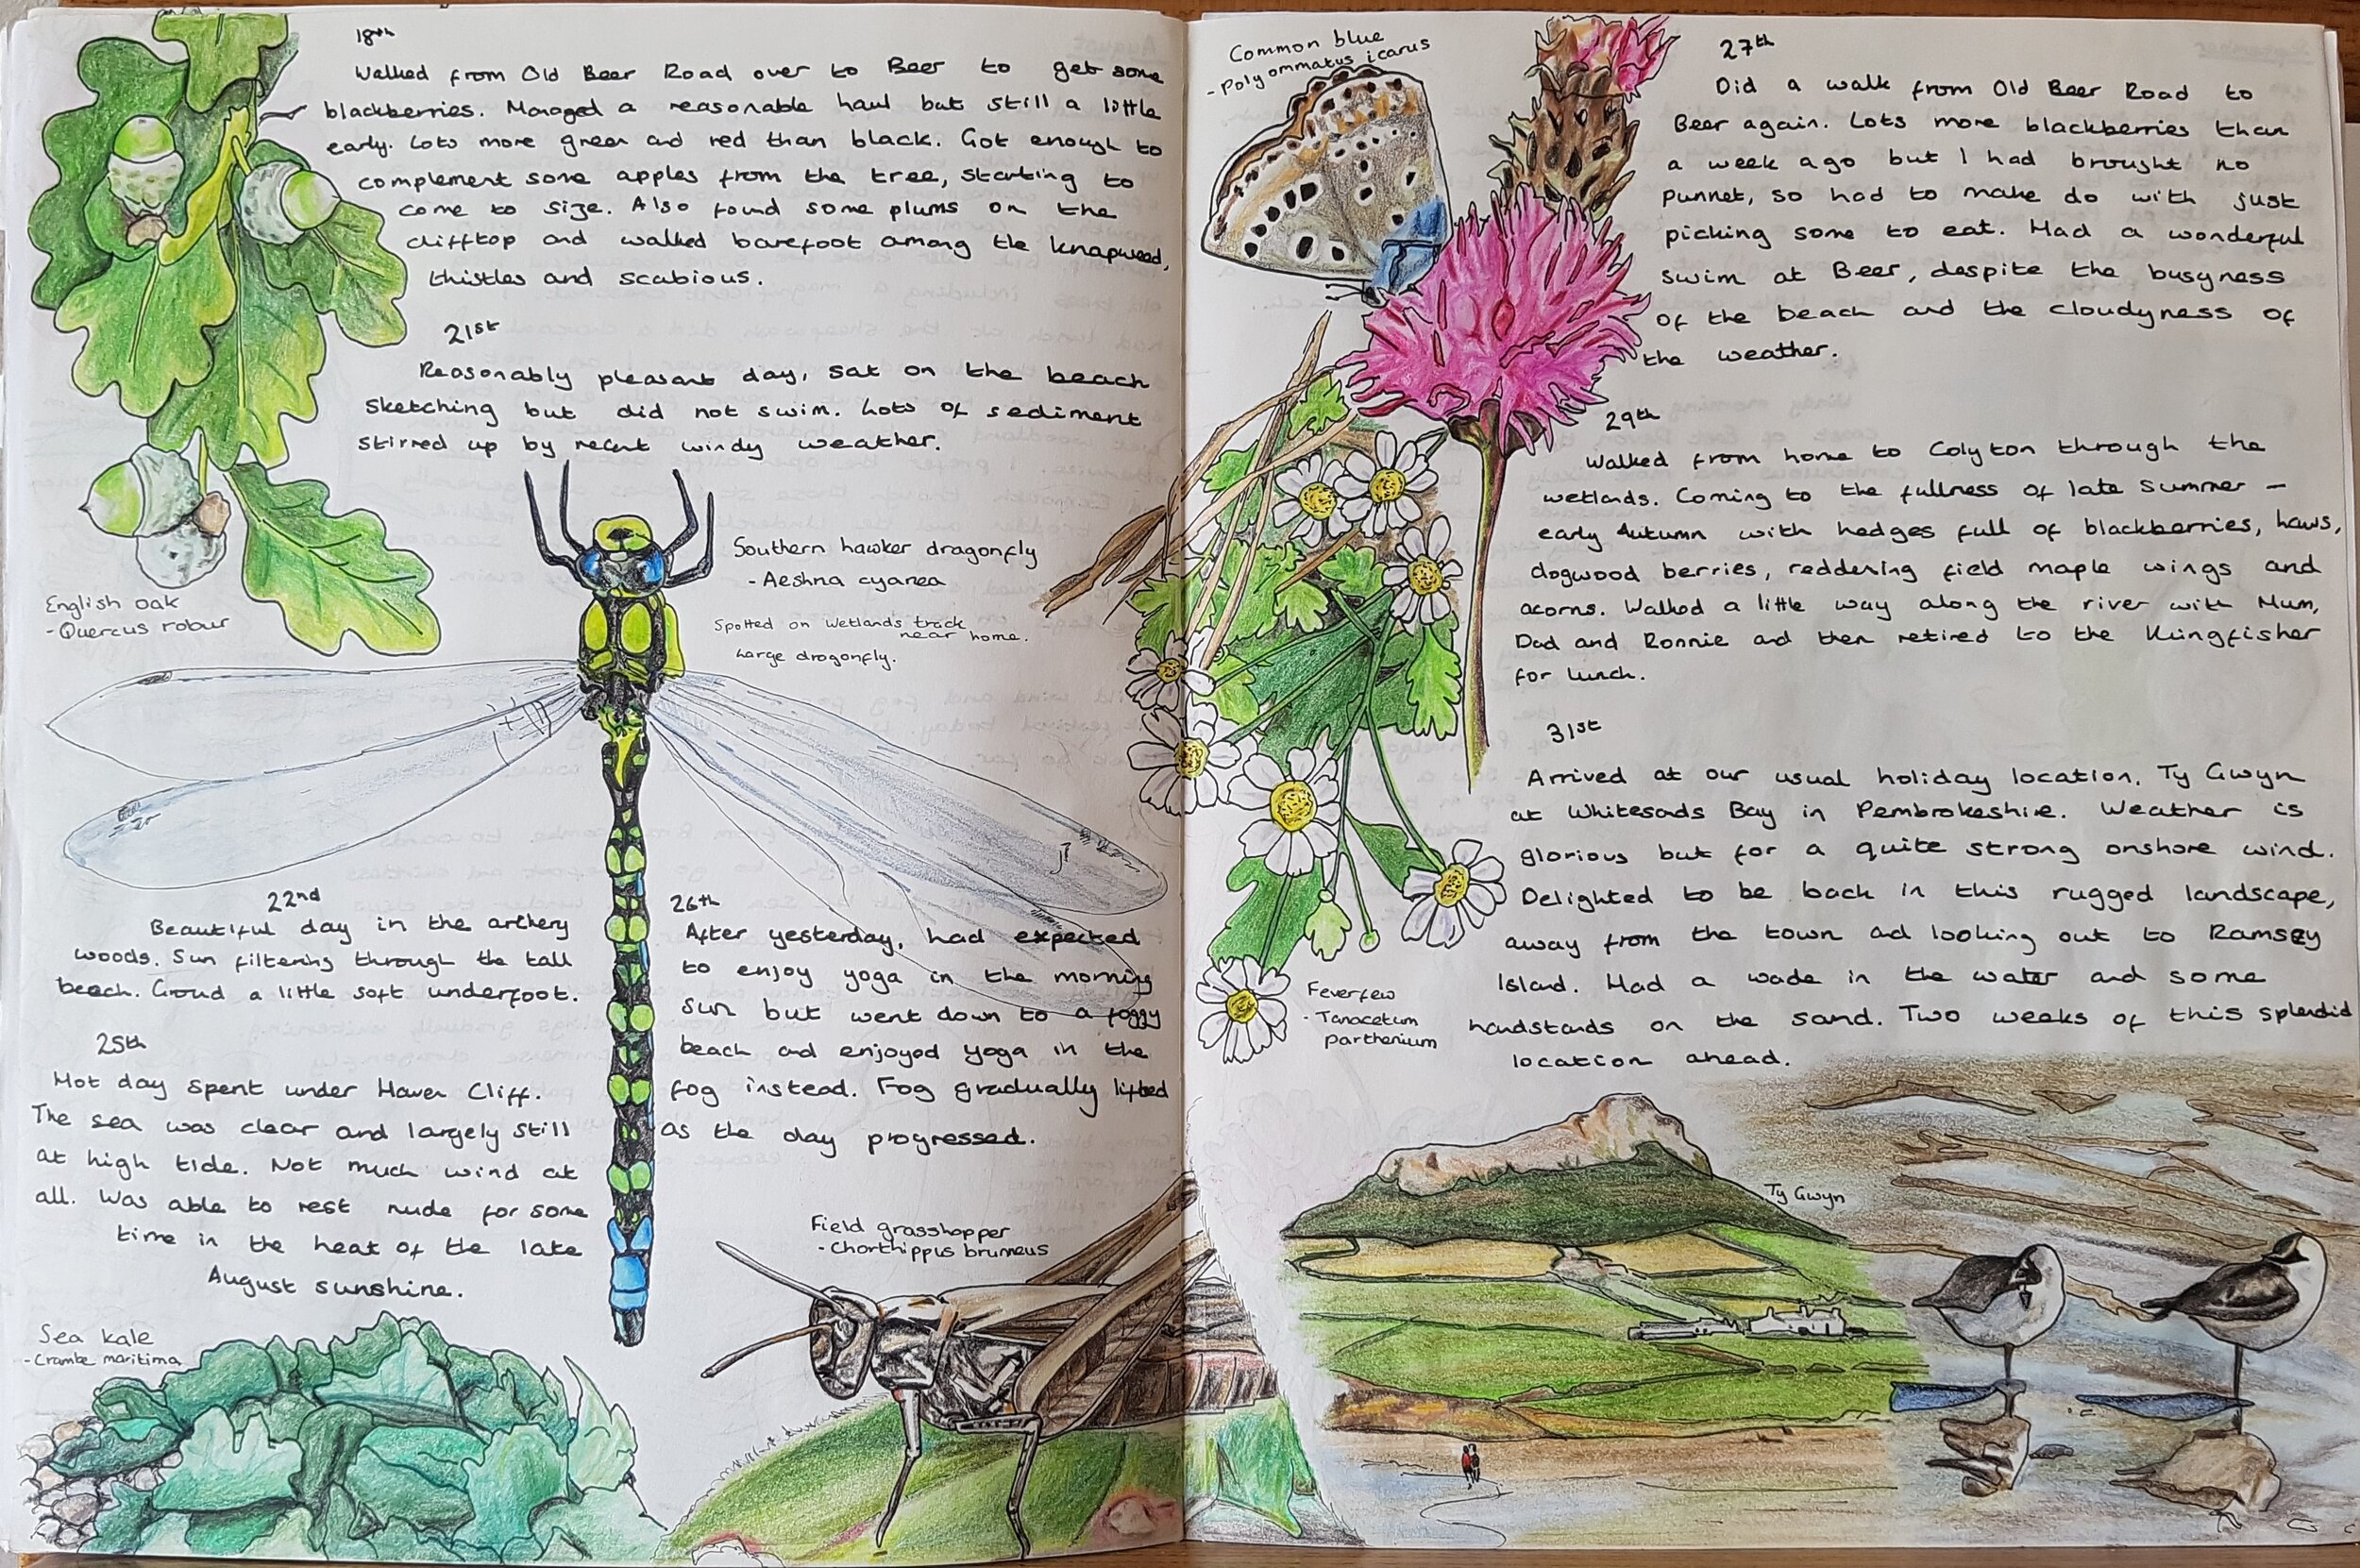 How to Keep a Nature Journal